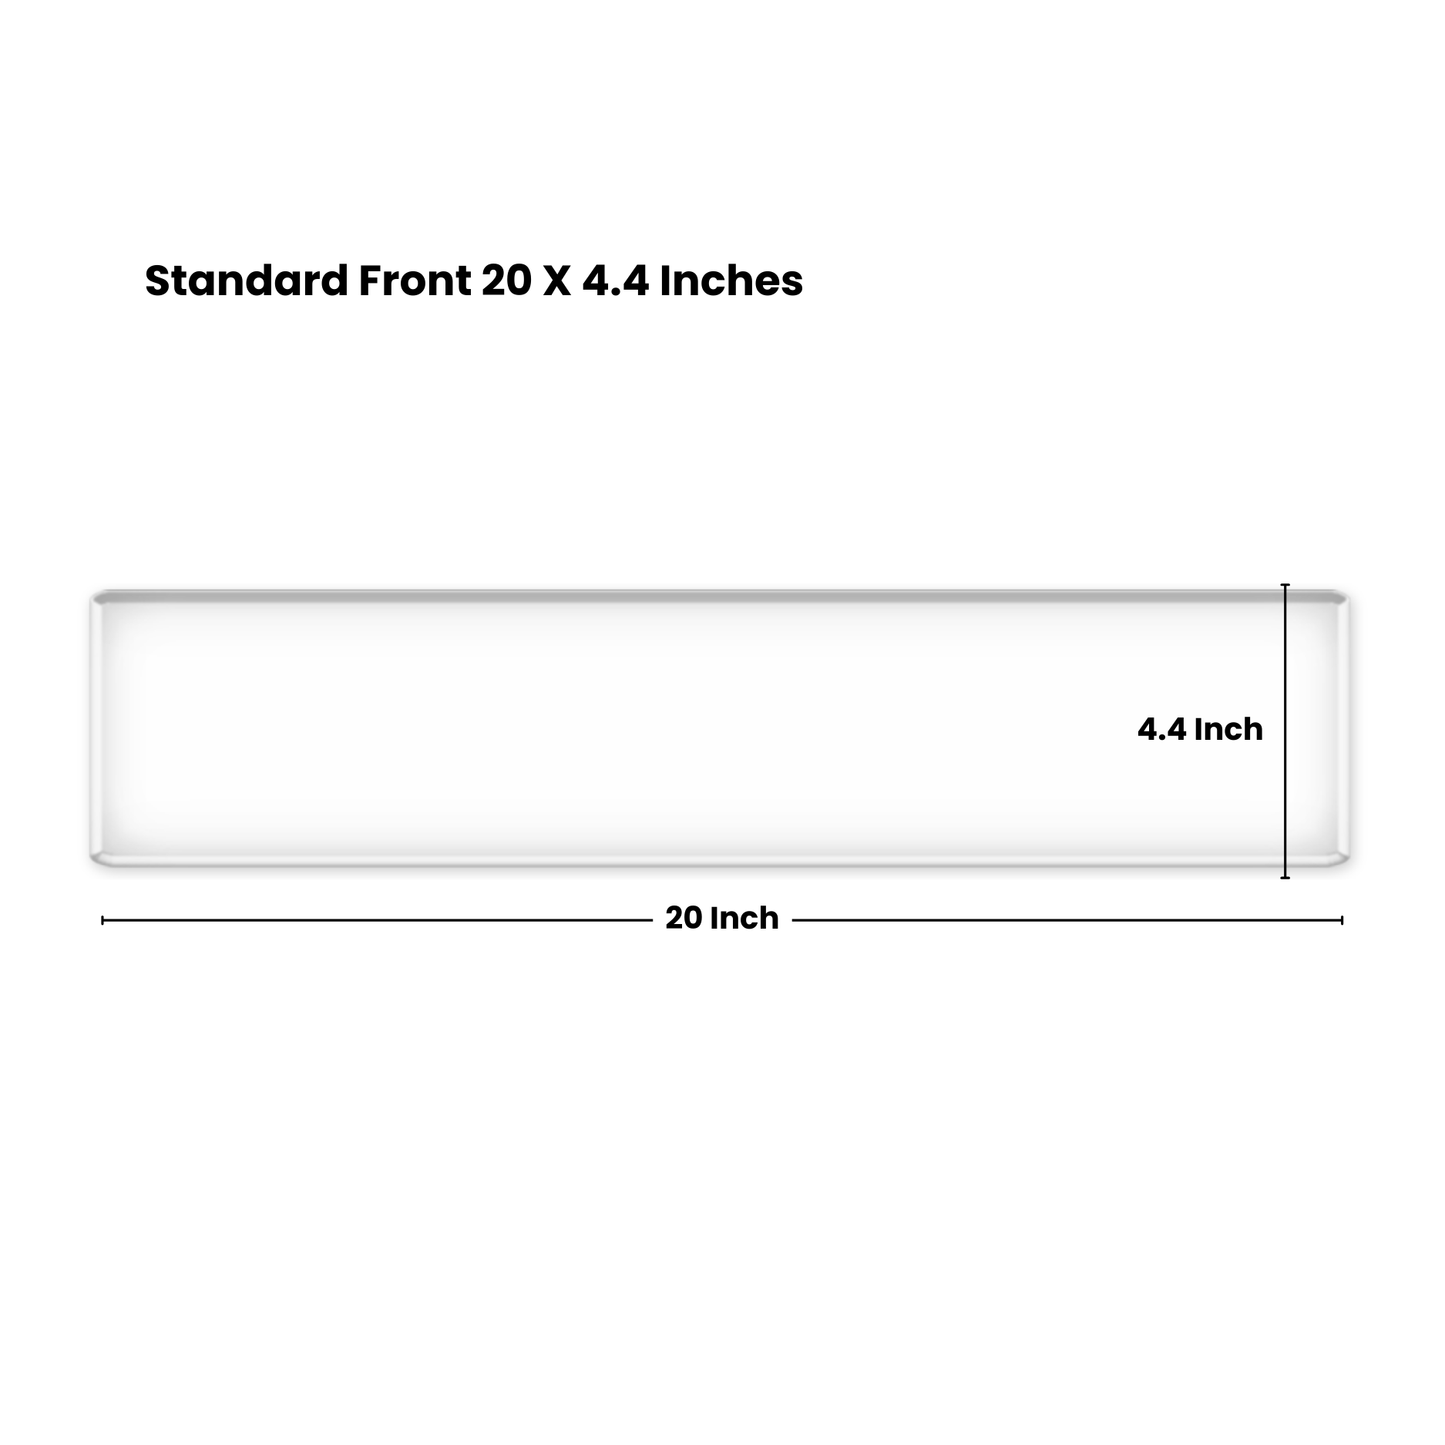 Pair of Standard Front and 11"x8" Rear Plate 4x4 in 3D, 4D, GHOST, 4D Matte, 4D Matte Ghost